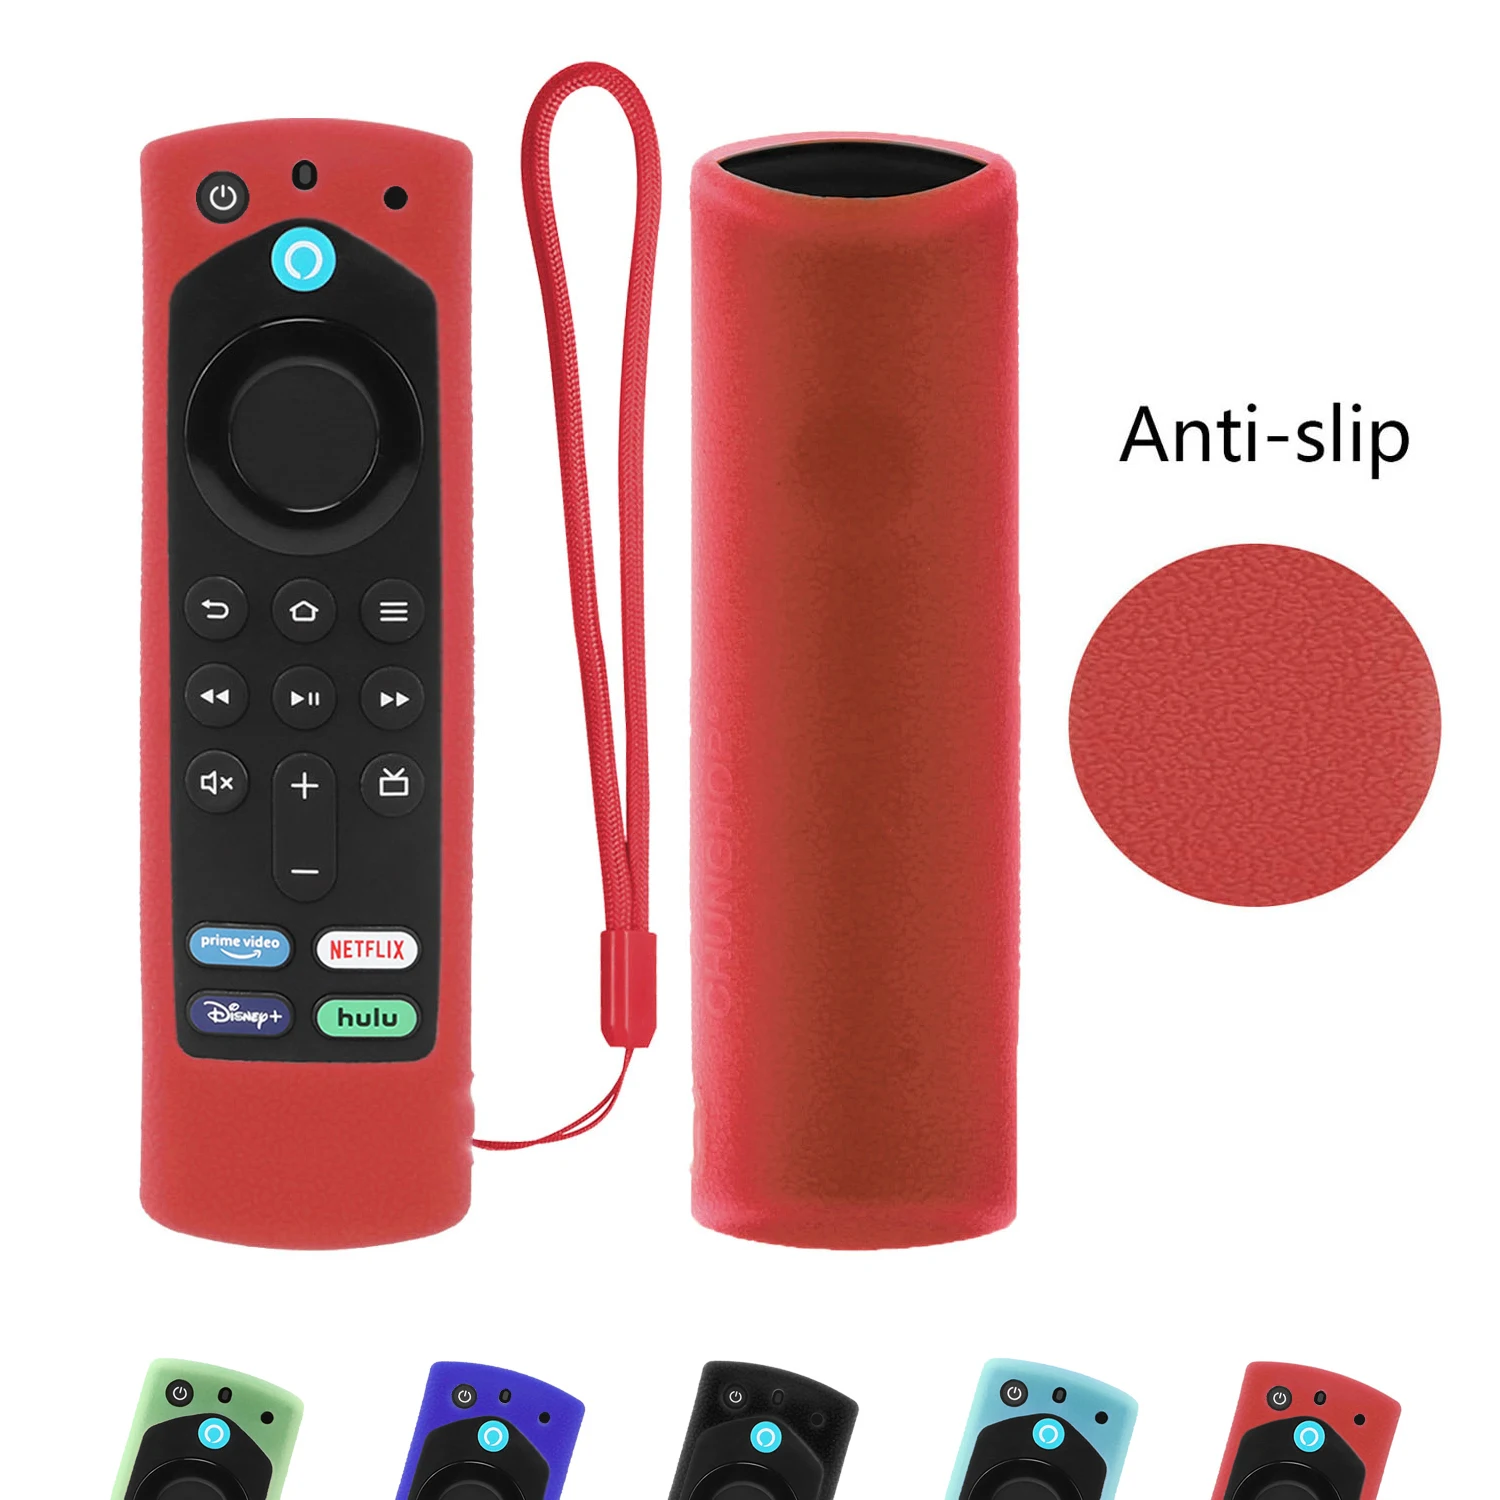 

For Original 2021 Amazon Fire TV Stick Protective Silicone Remote Control Case 3rd Gen Shockproof Anti-Slip Sleeve With Lanyard